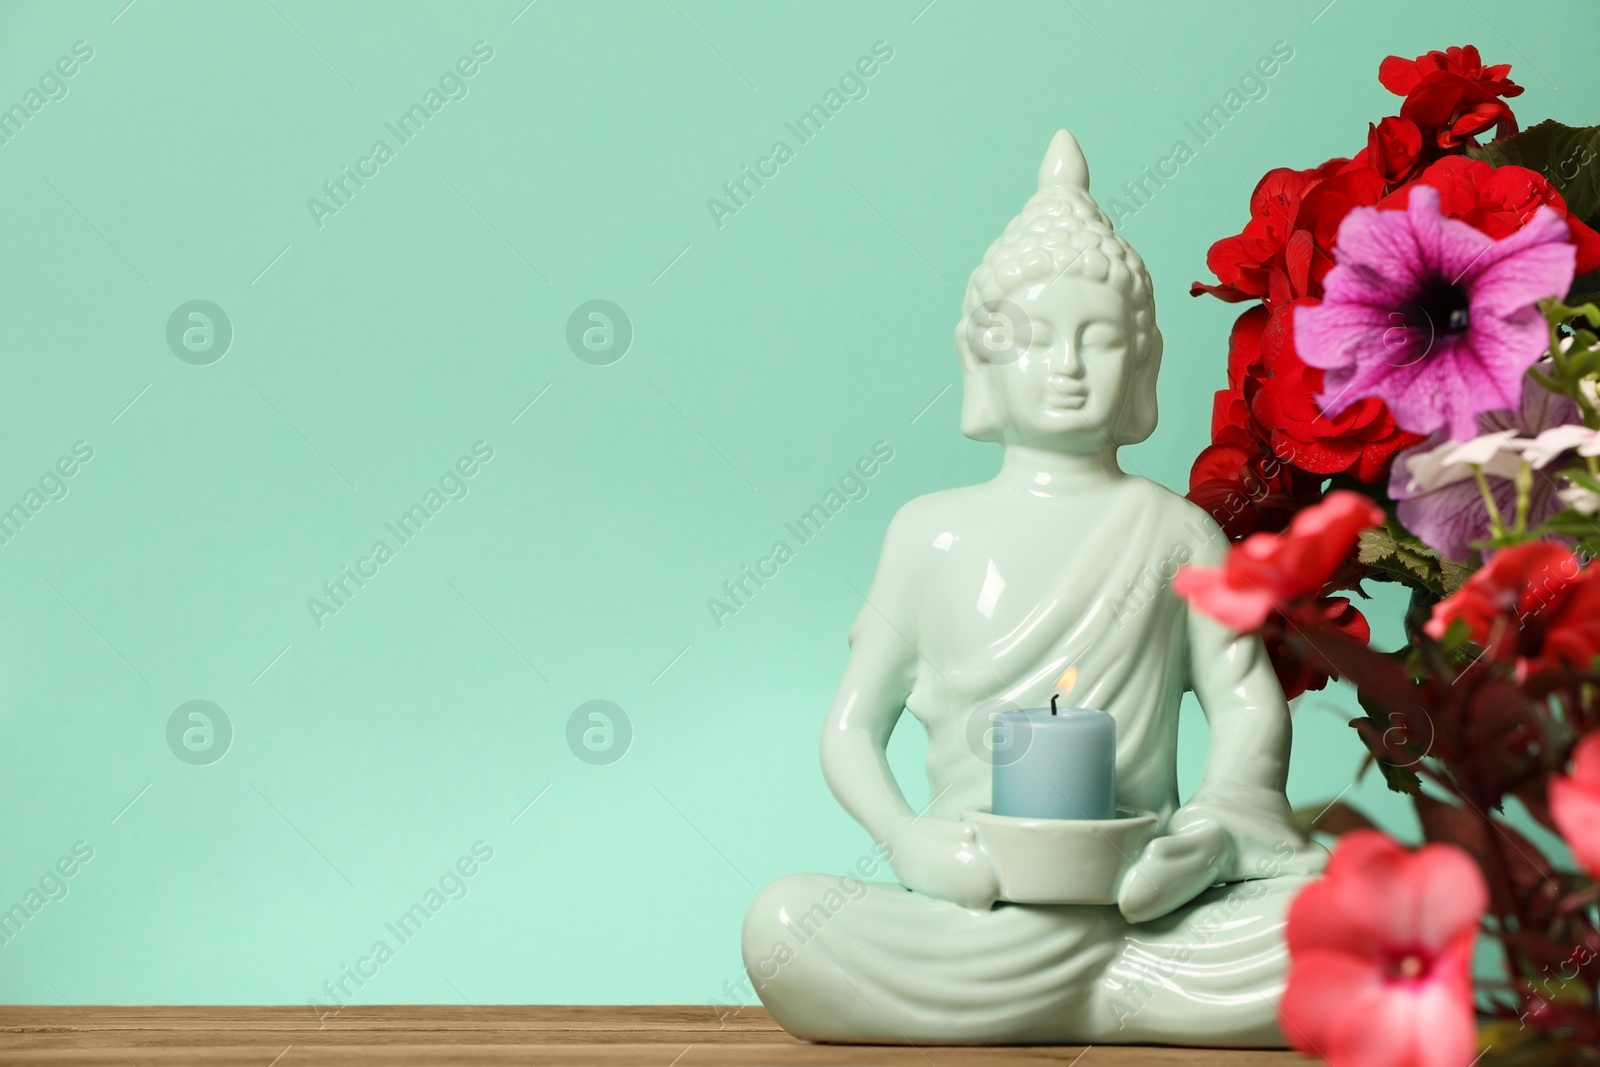 Photo of Buddhism religion. Decorative Buddha statue with burning candle and beautiful flowers on table against turquoise wall, space for text